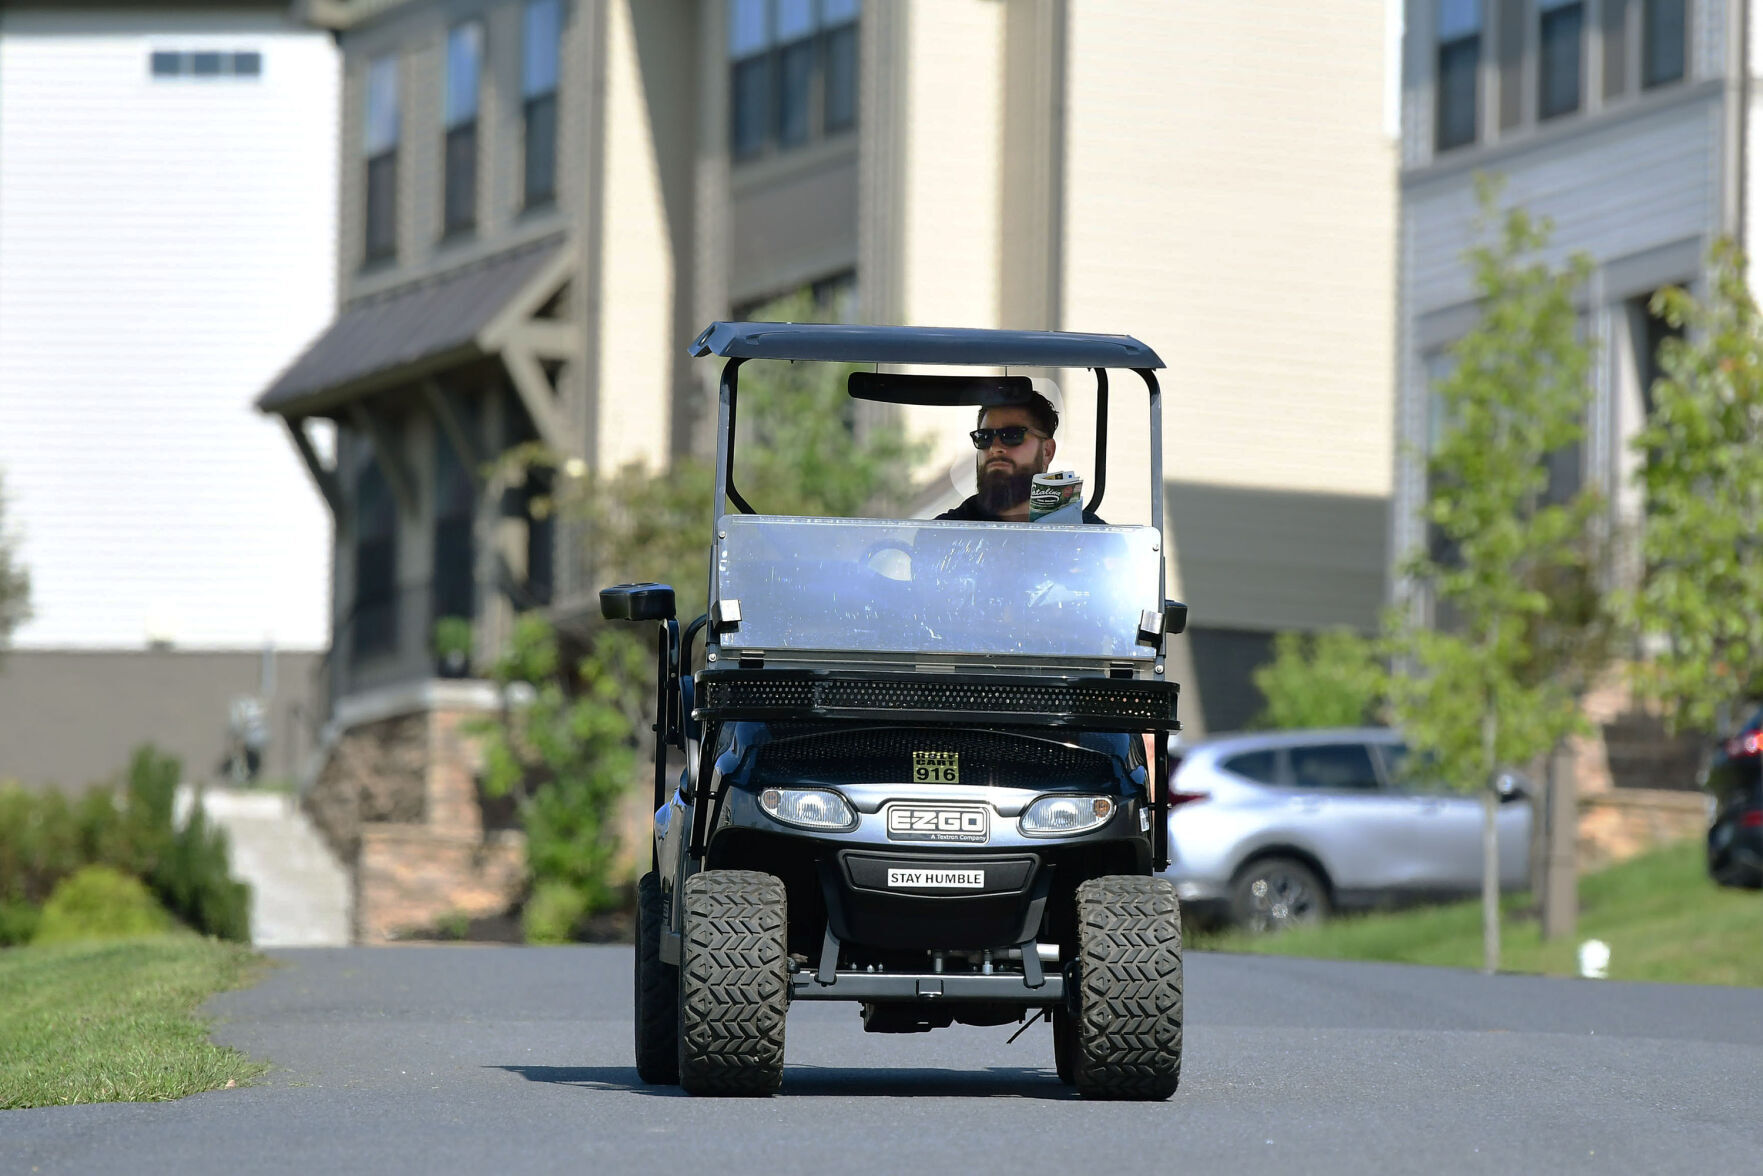 Expanded golf cart access considered in New Market